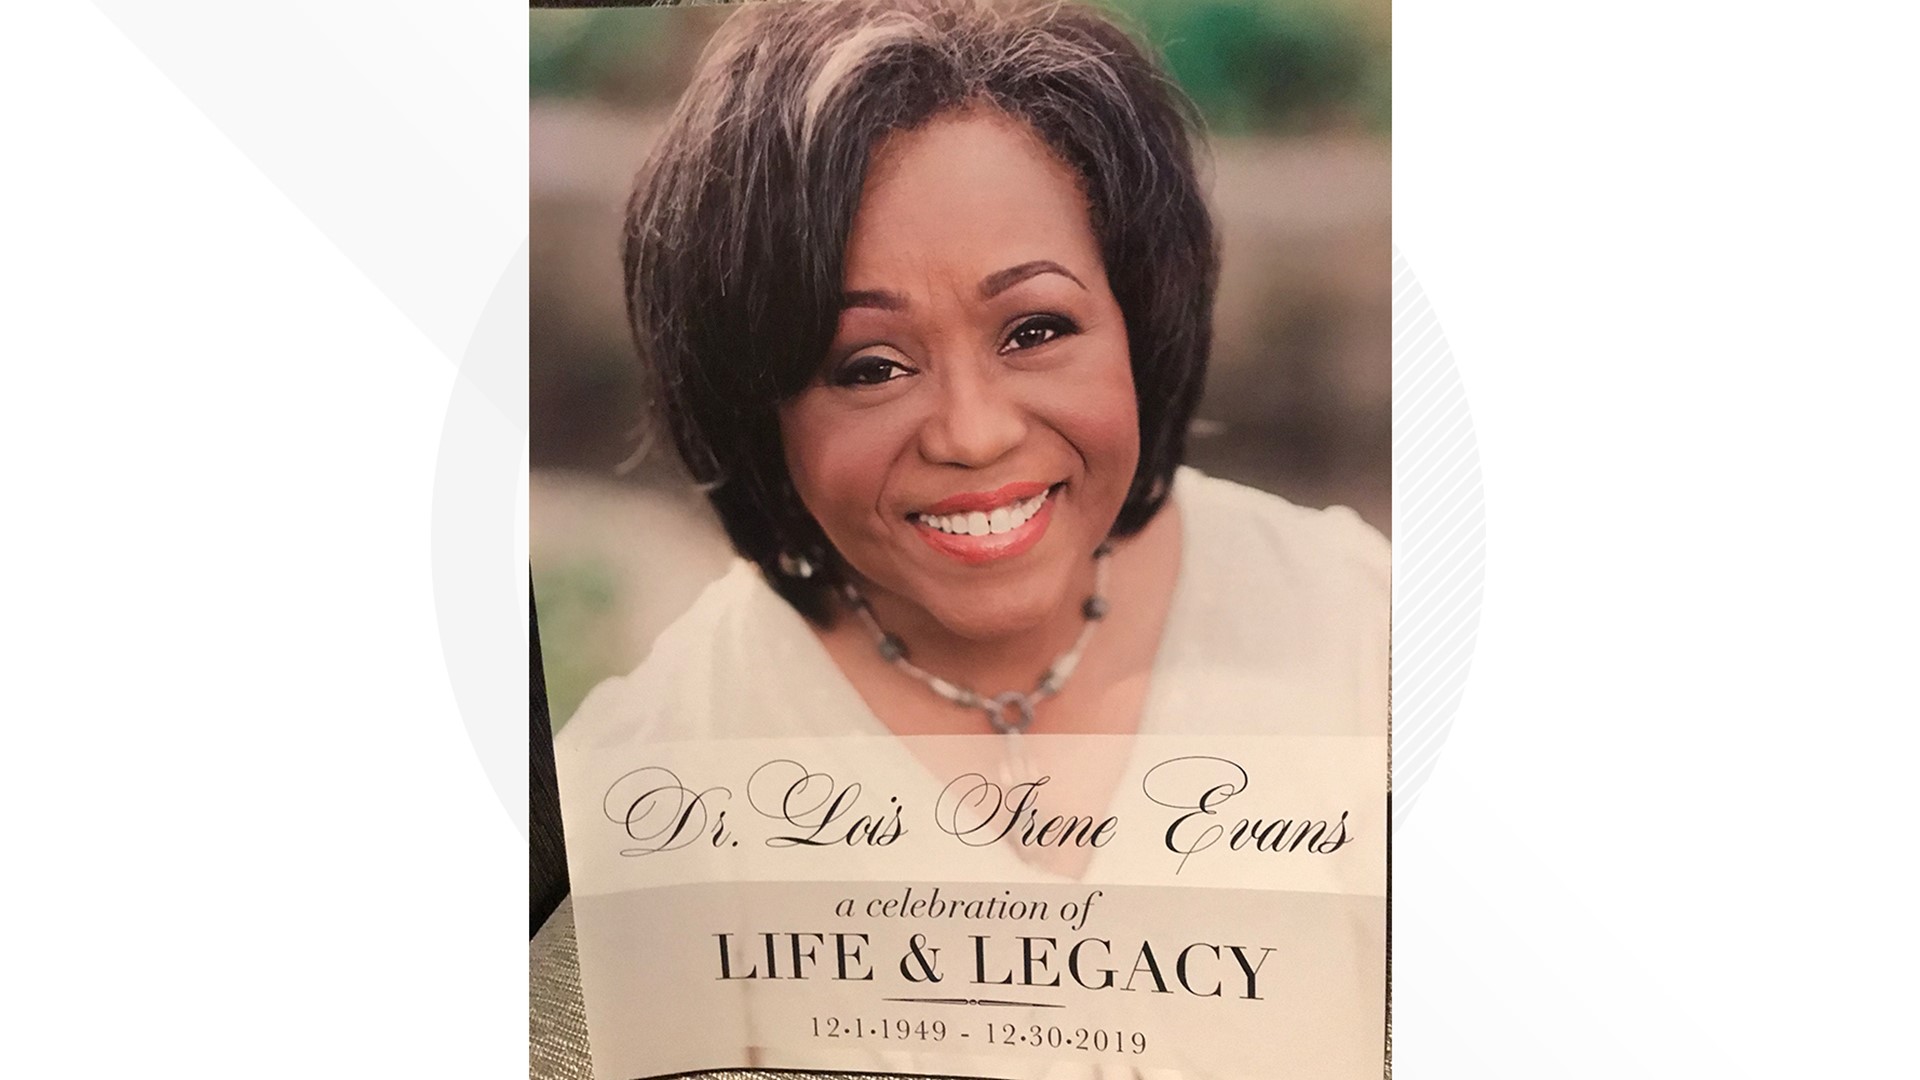 Lois Evans, 70, was married to Tony Evans, who is the pastor at Oak Cliff Bible Fellowship. Together, the grew the church from 10 members to more than 9,500 members.